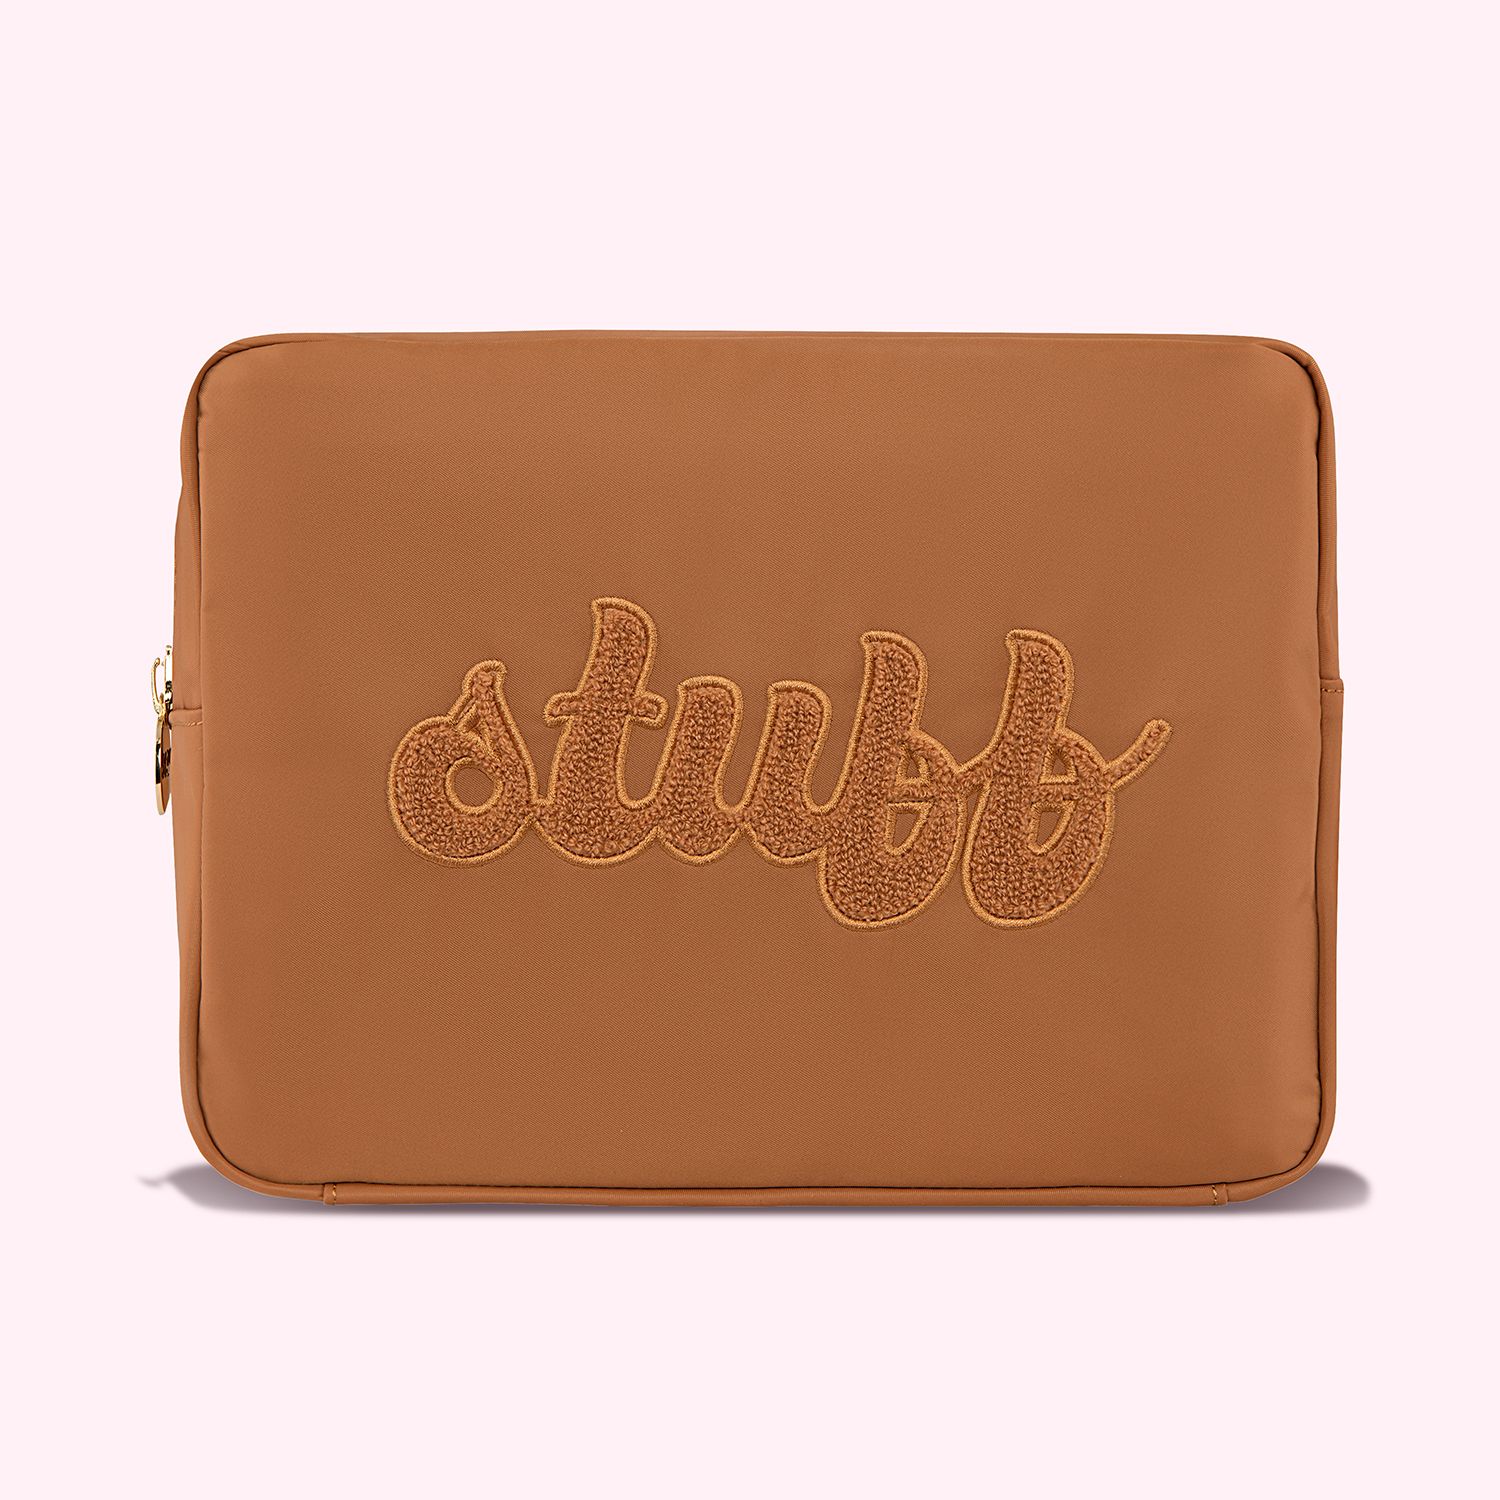 Stuff Embroidered Large Pouch | Stoney Clover Lane